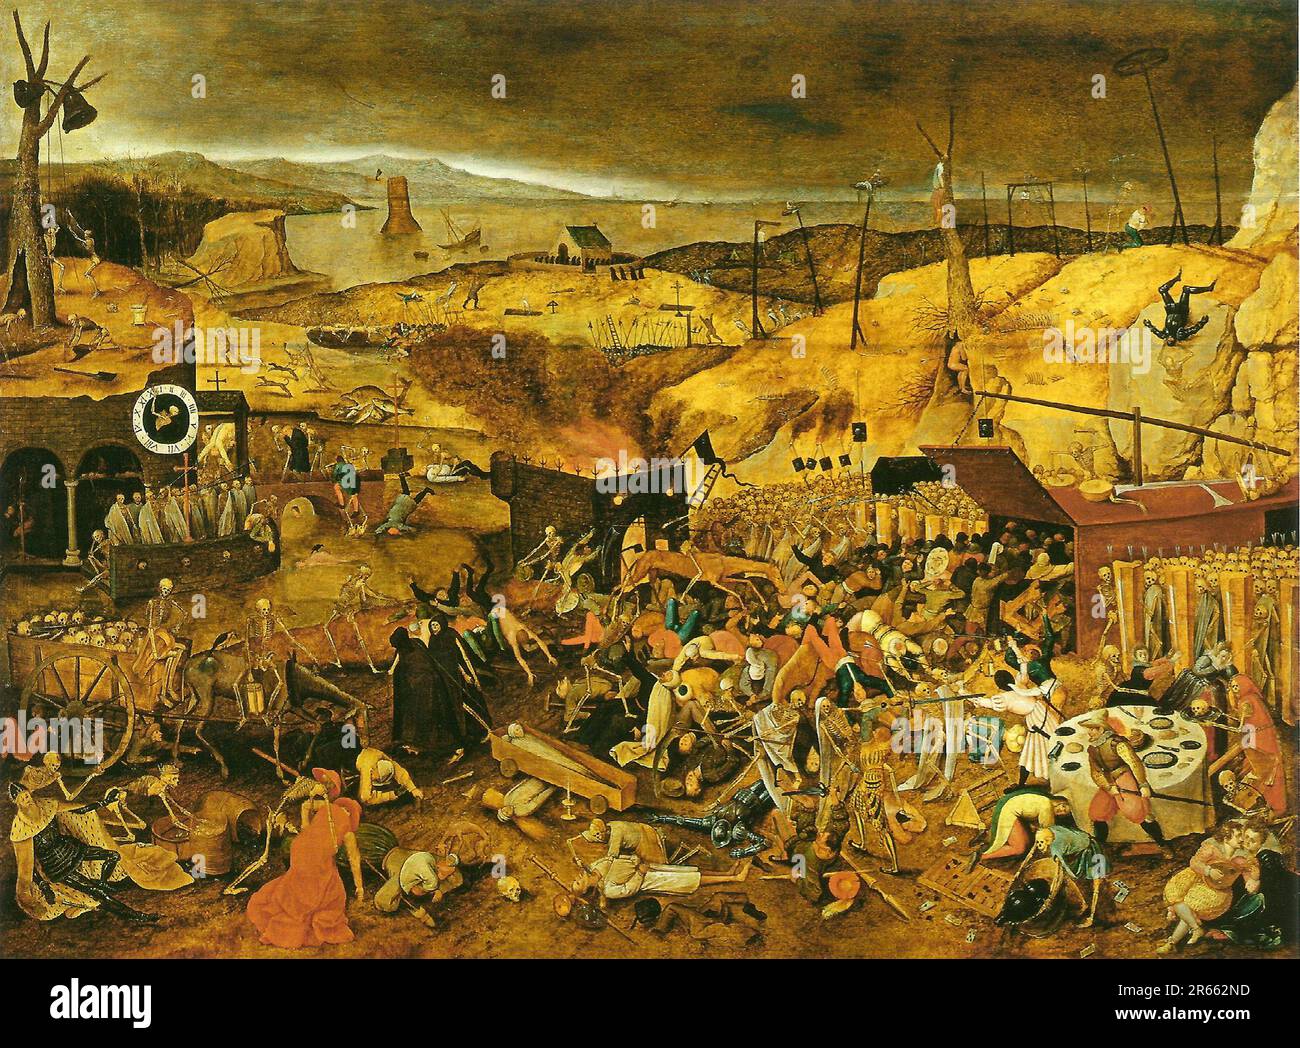 Triumph of Death painted by a follower of Peter Brueghel the Elder. Breughel was the most important painter of the Dutch and Flemish Renaissance. His choice of subjects was influential, he rejected portraits and religious scenes in favour of local and peasant scenes. Stock Photo